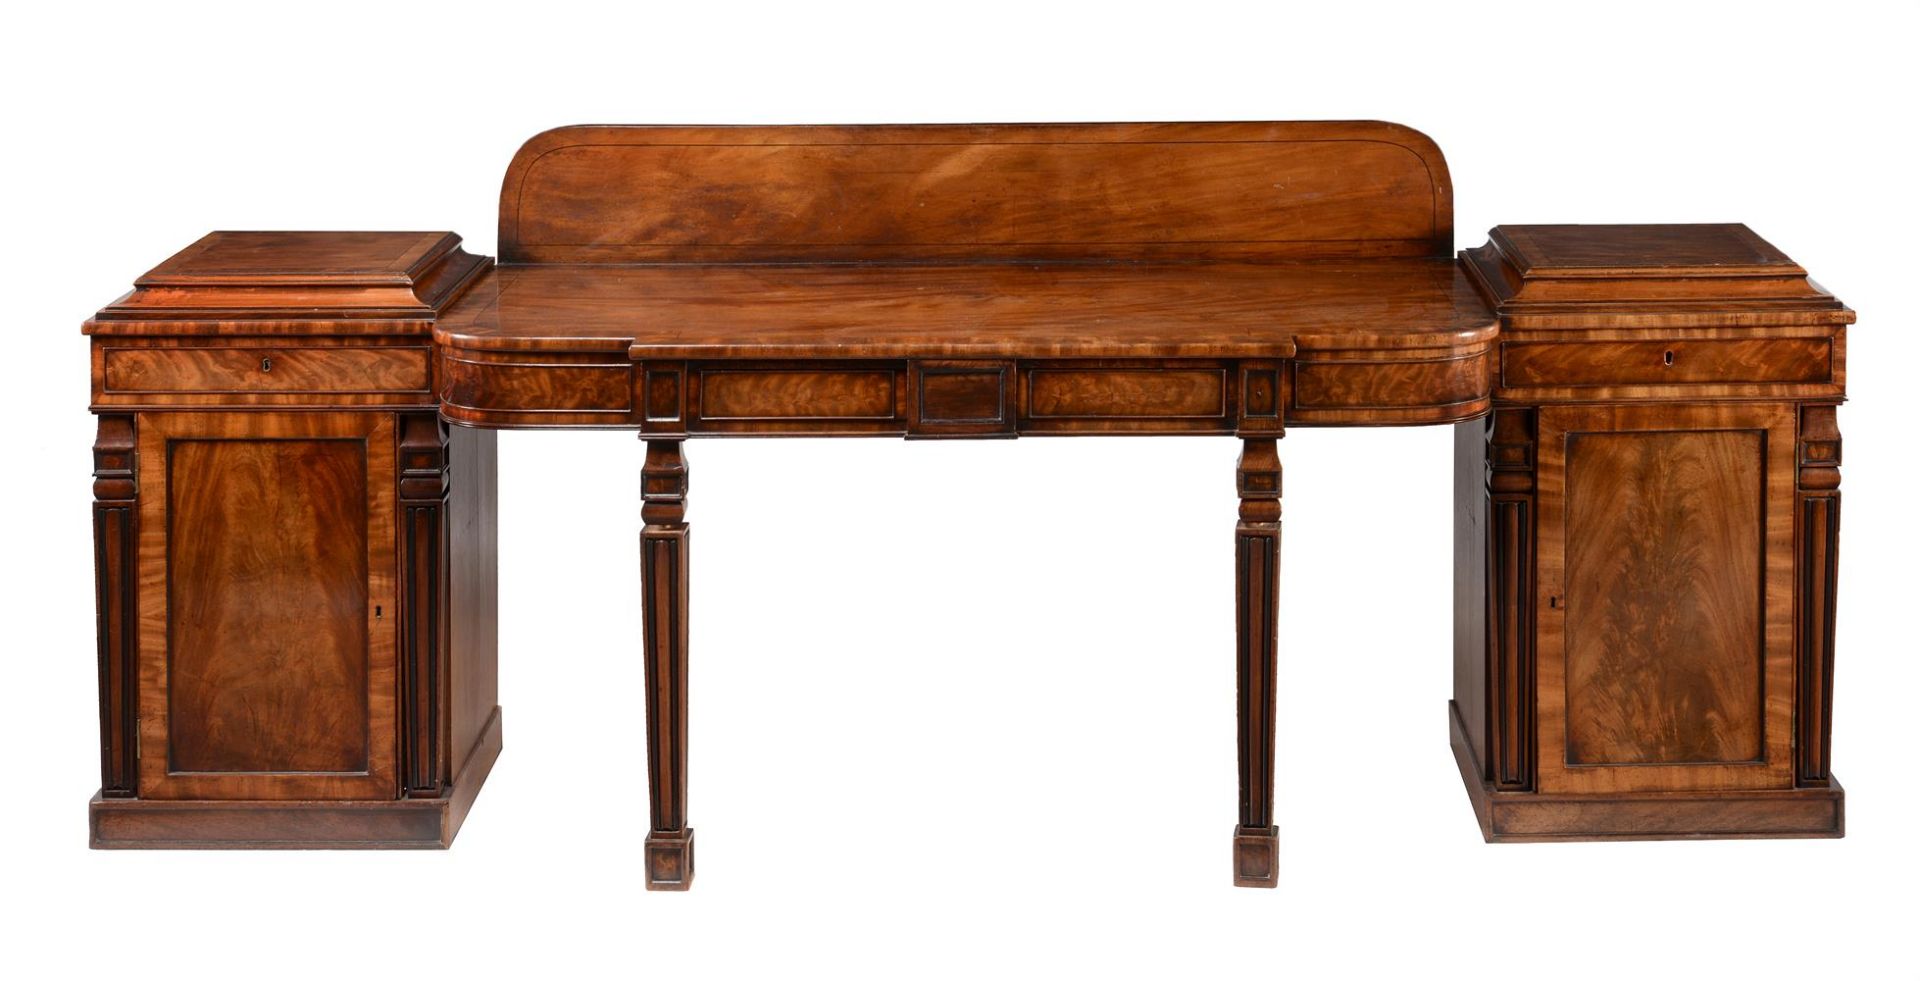 A LARGE MAHOGANY PEDESTAL SIDEBOARD, SECOND QUARTER 19TH CENTURY